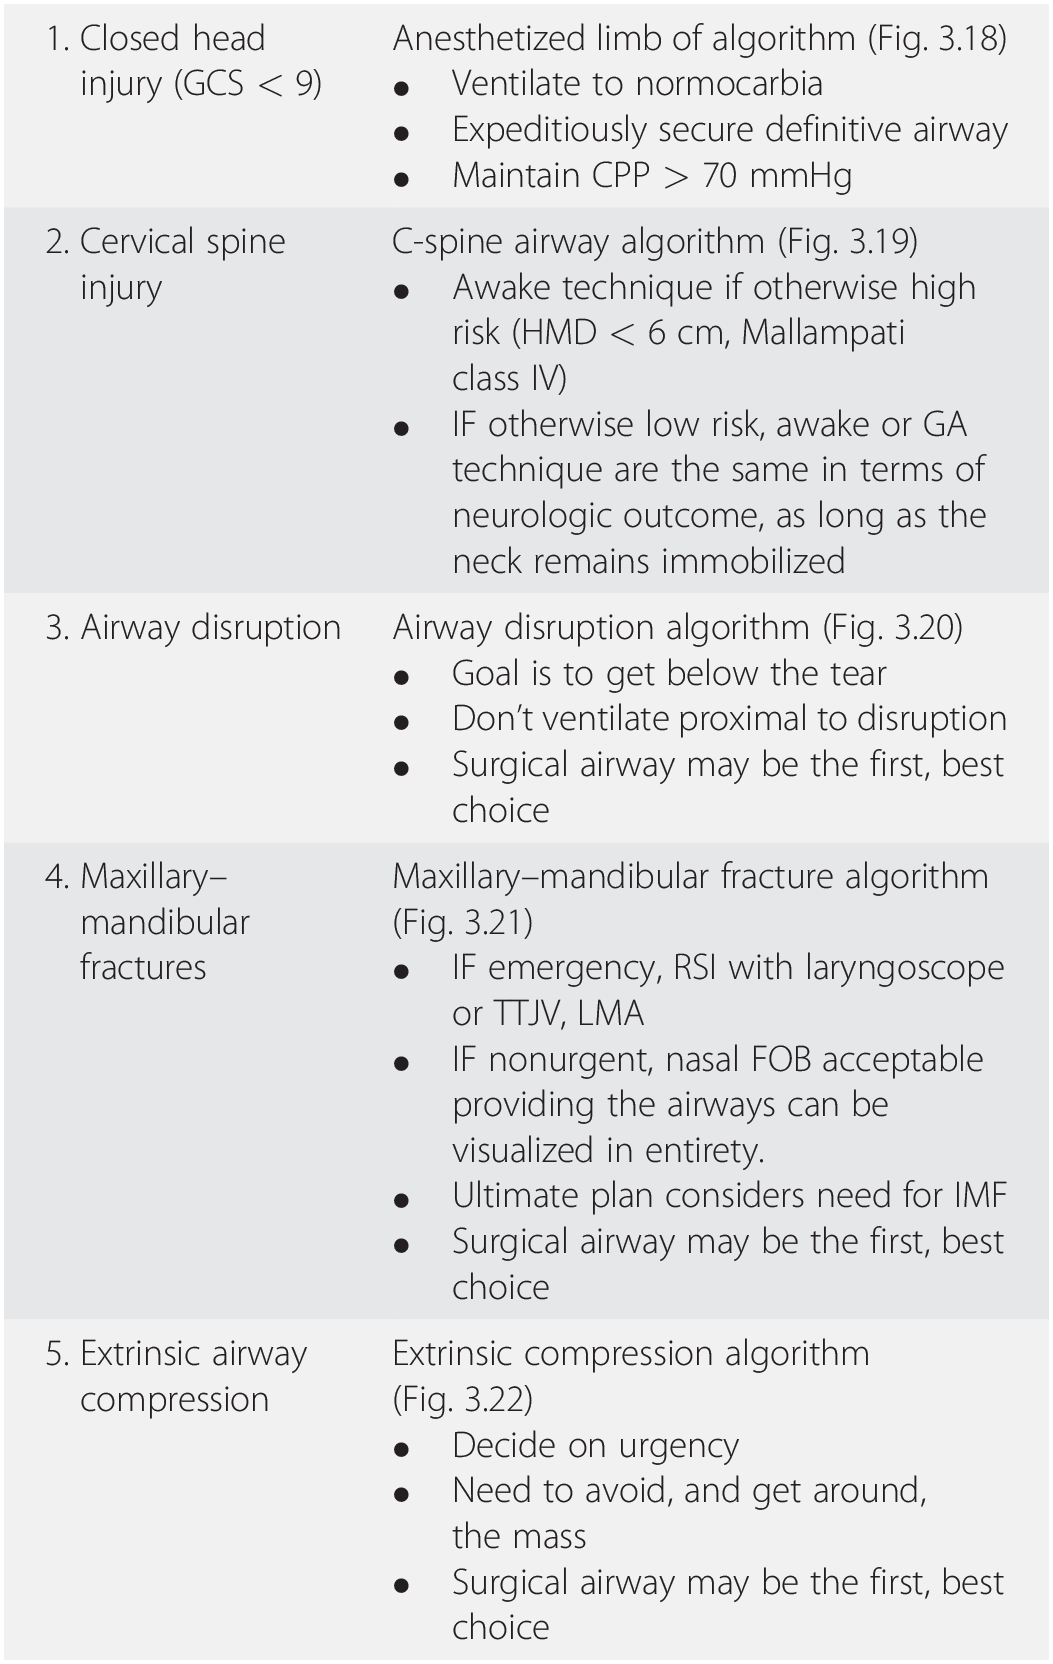 The Role of the LMA as a Ventilating and Intubation Conduit During  Emergency Airway Management